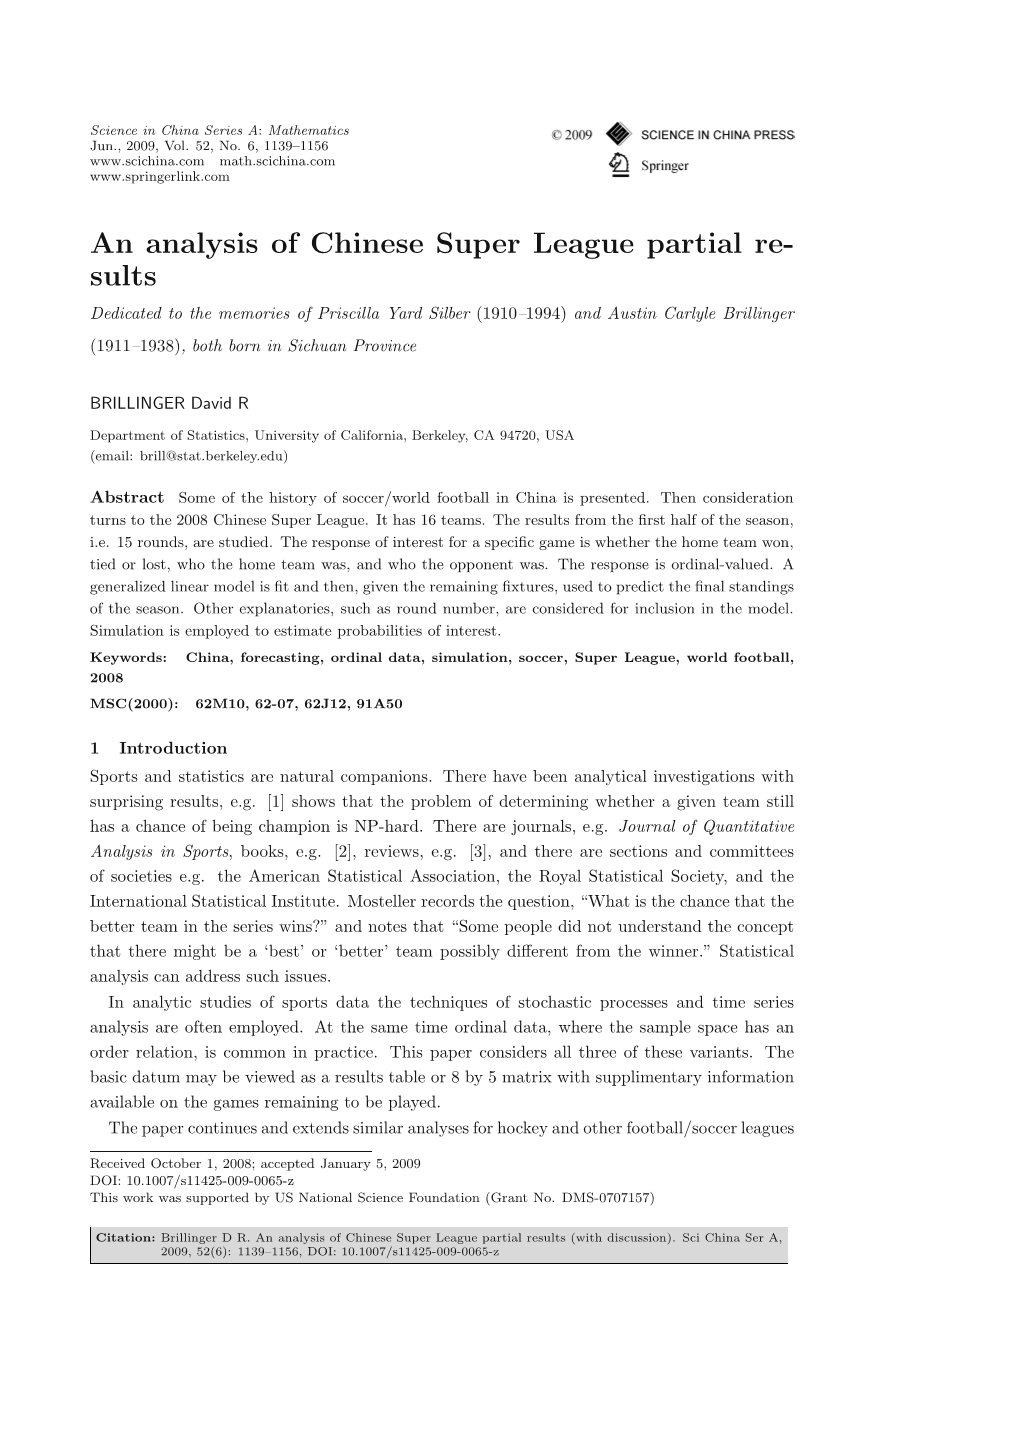 An Analysis of Chinese Super League Partial Results (With Discussion)